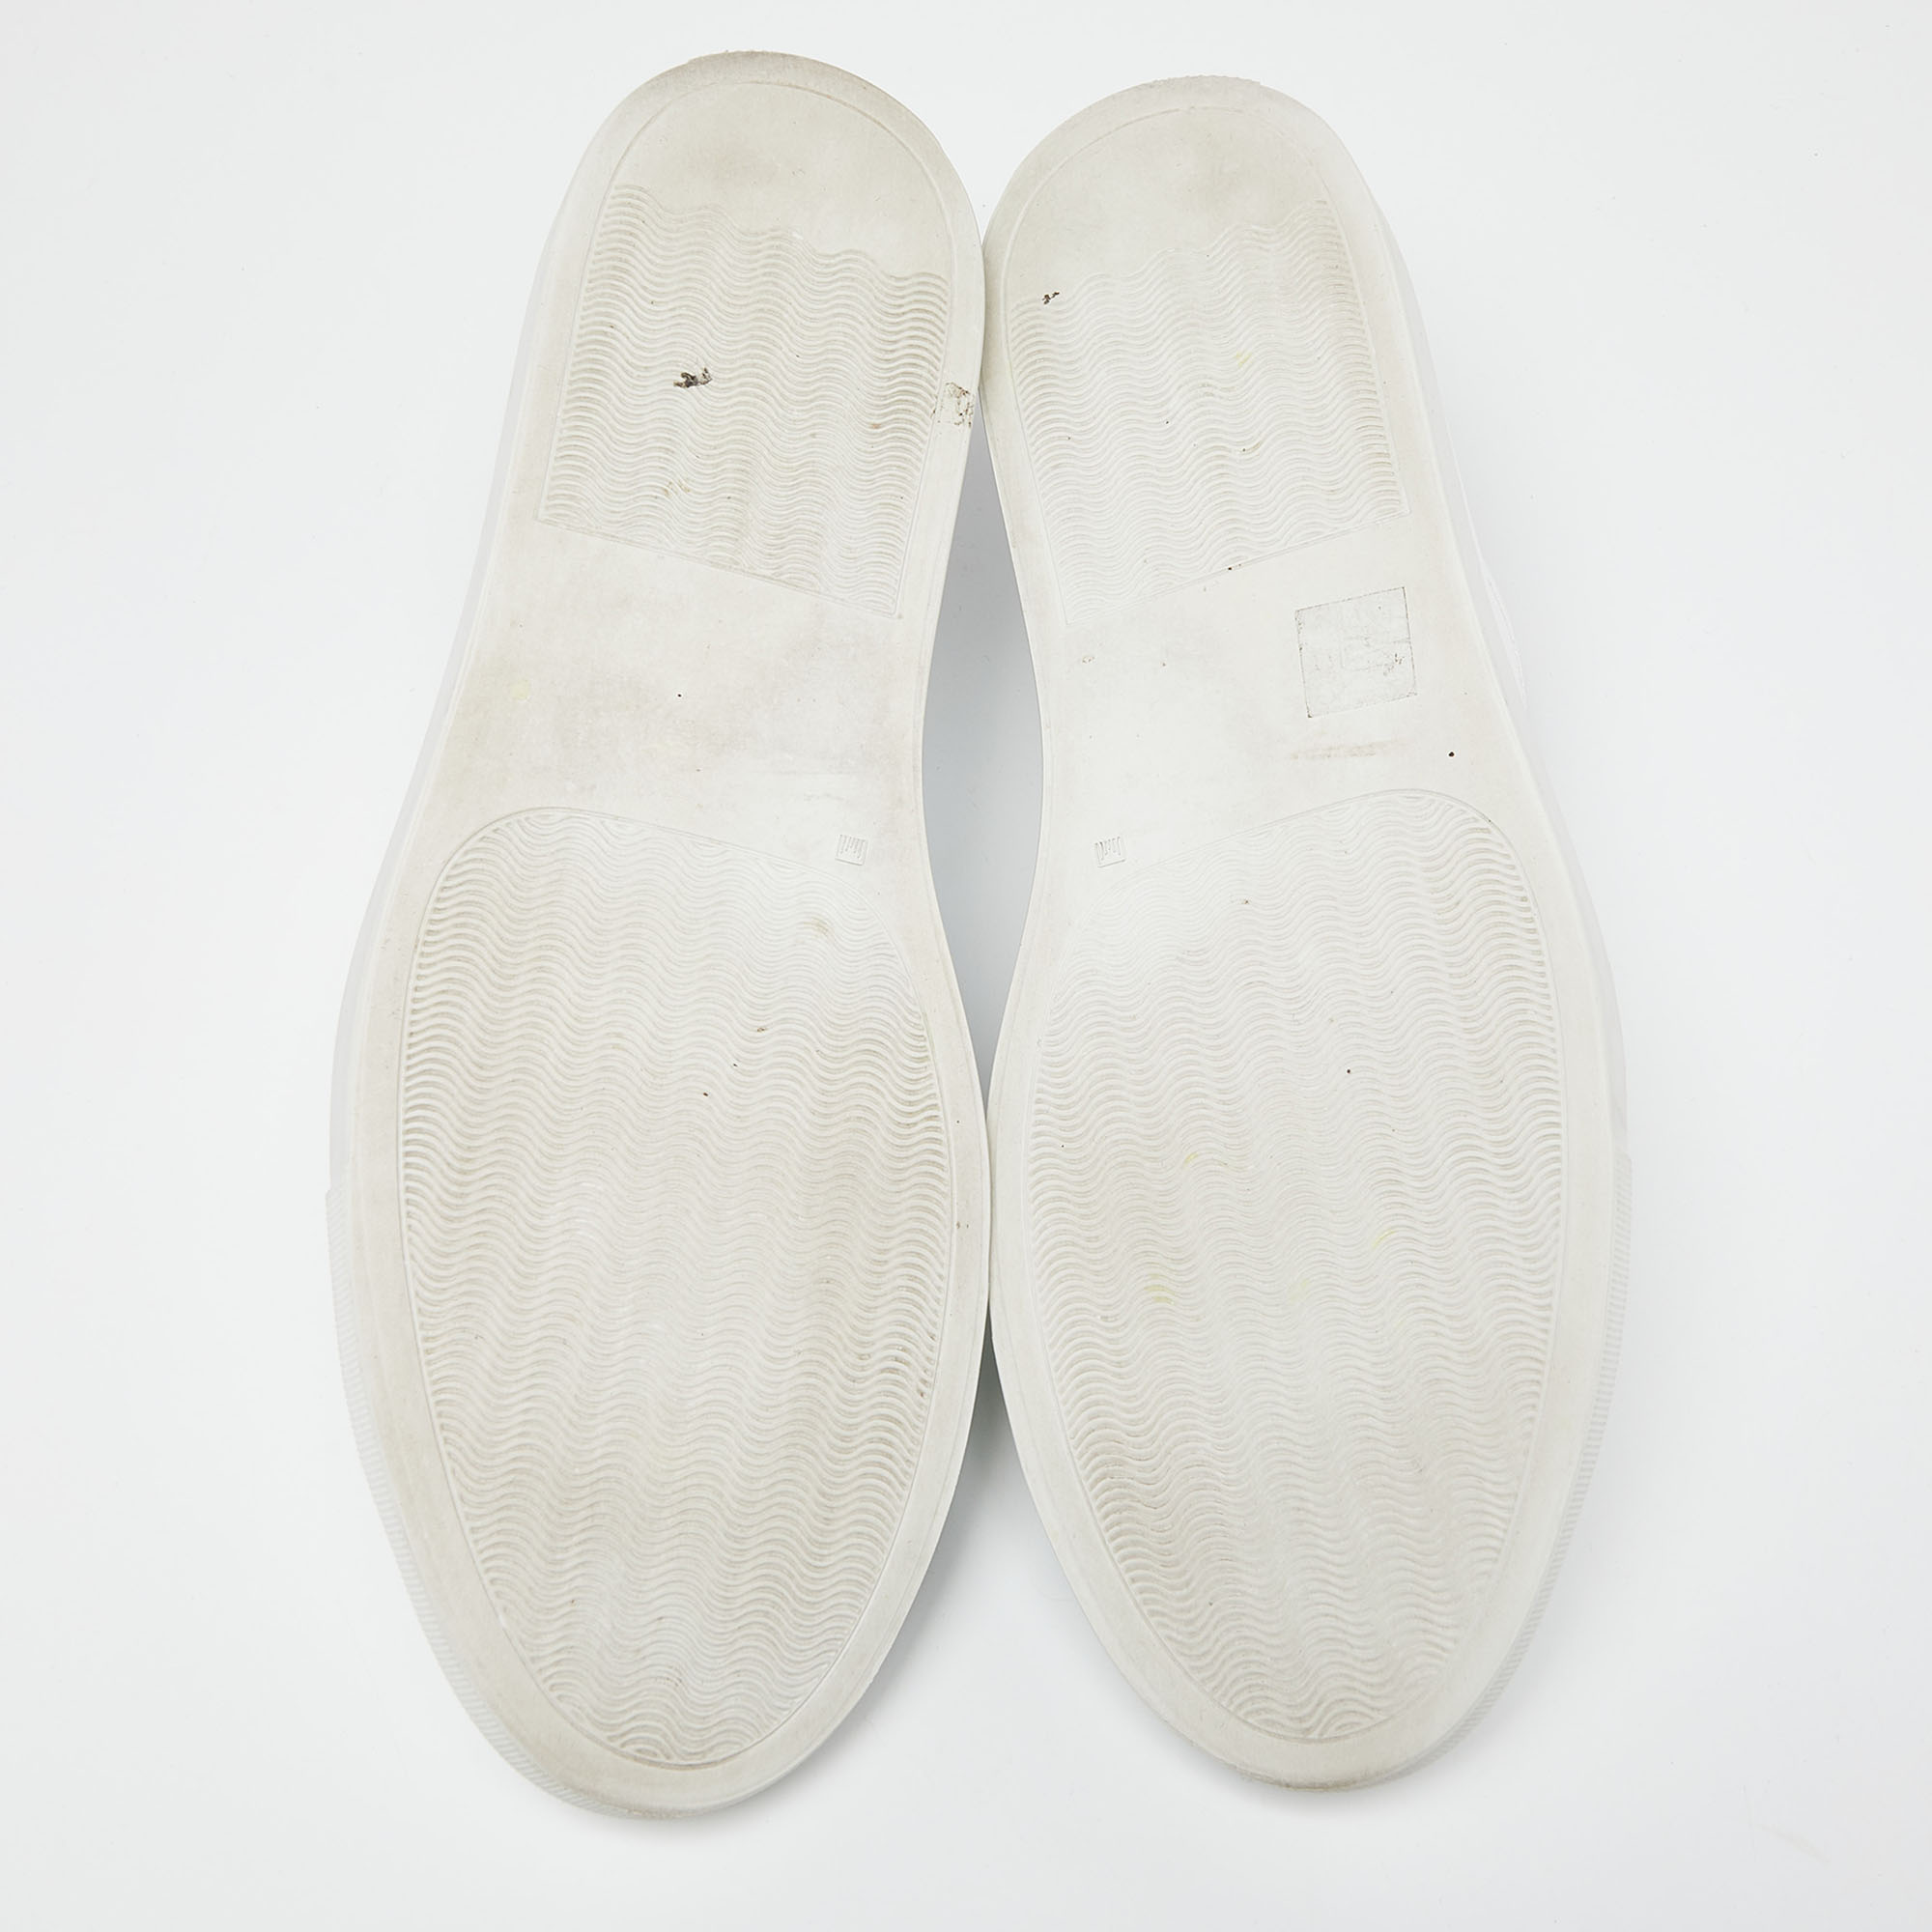 Common Projects White Leather Achilles Sneakers Size 45